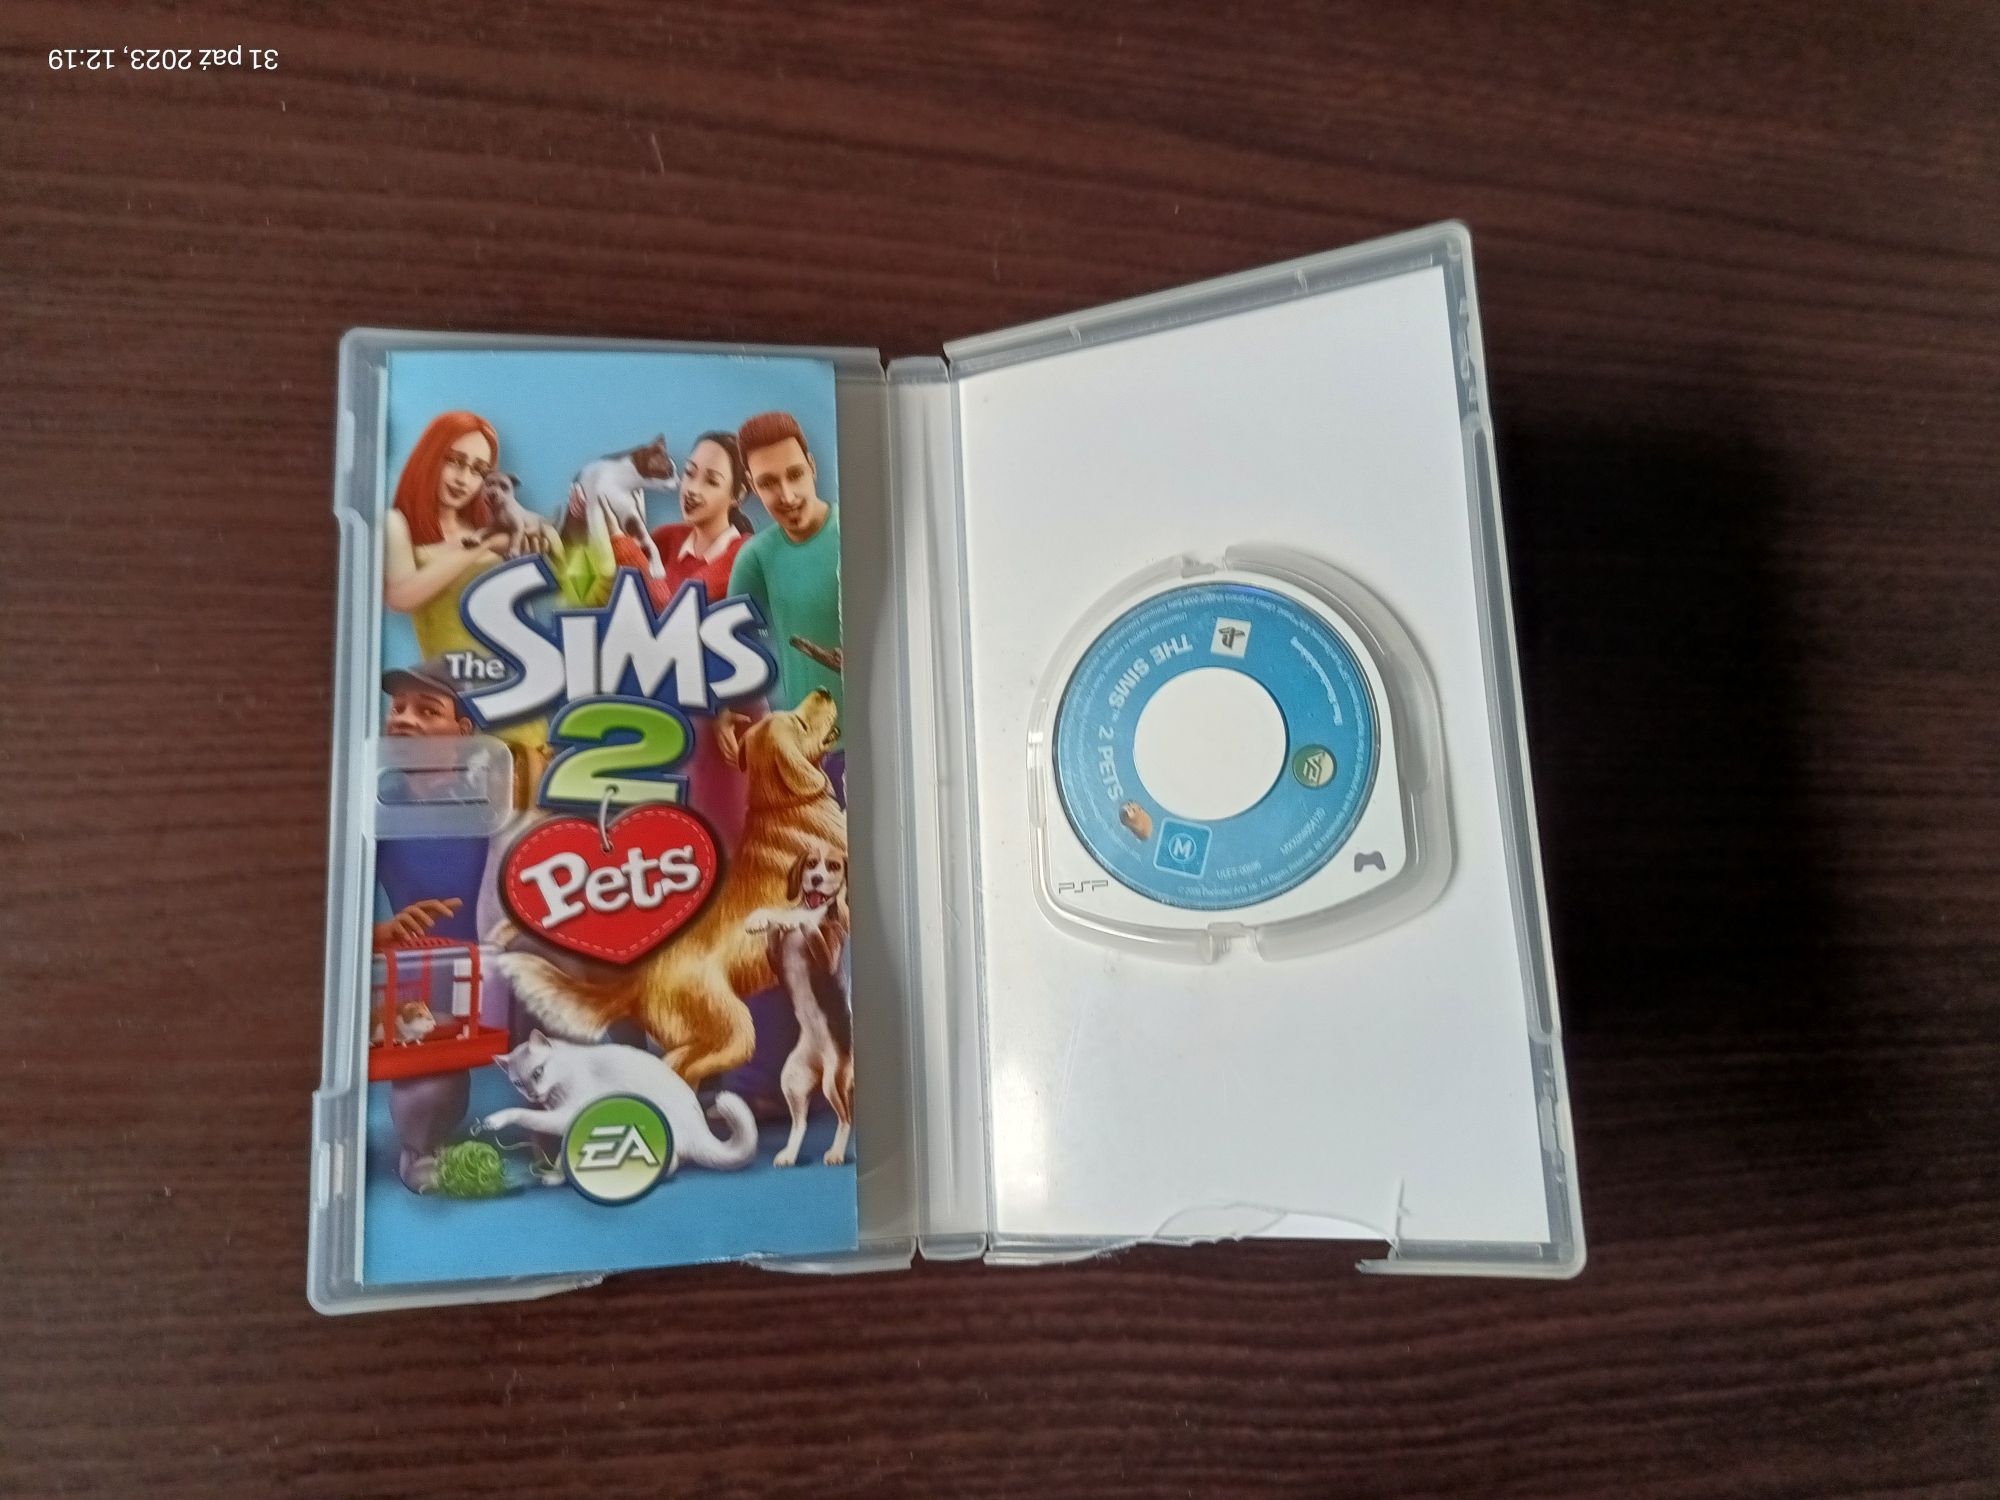 The Sims 2 Pets  PSP